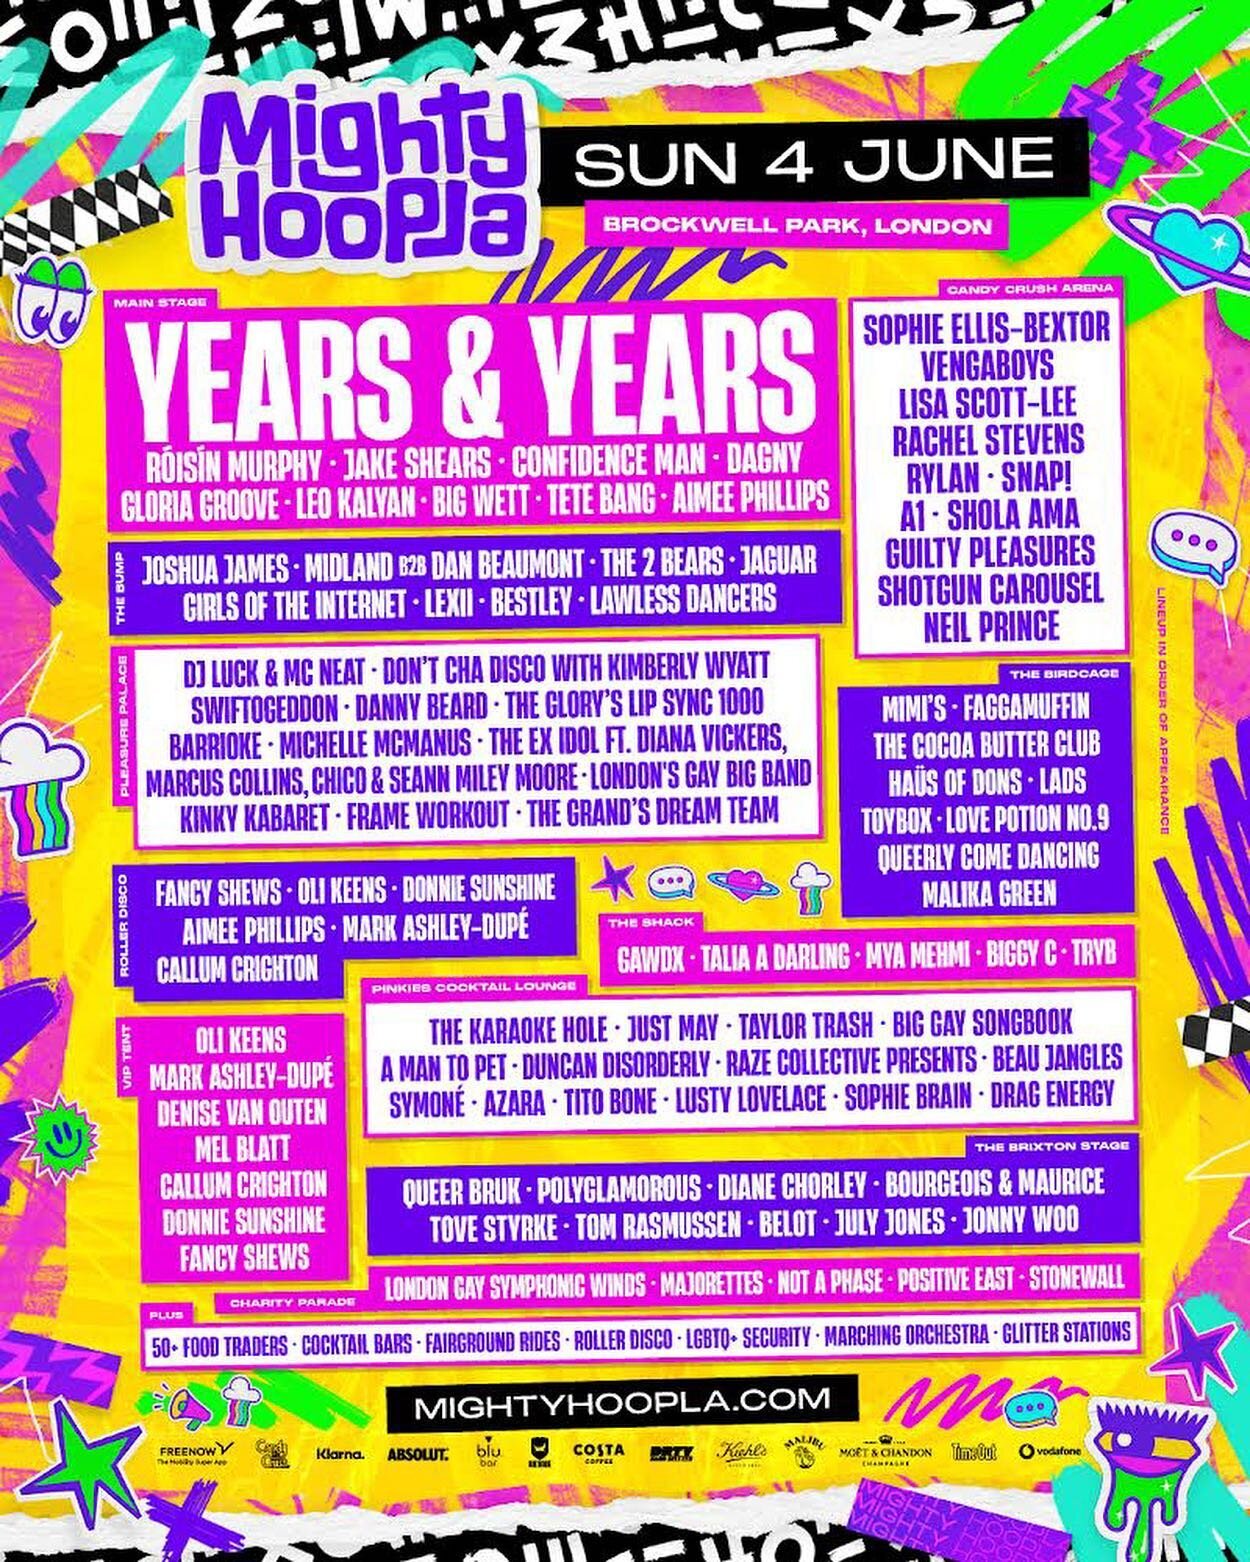 Meowww LONDON she&rsquo;s back for a quickie! 🇬🇧Looking forward to performing Sunday @mightyhoopla June 4th

Can&rsquo;t believe I&rsquo;m back next week! Oh my Gawddddddddd